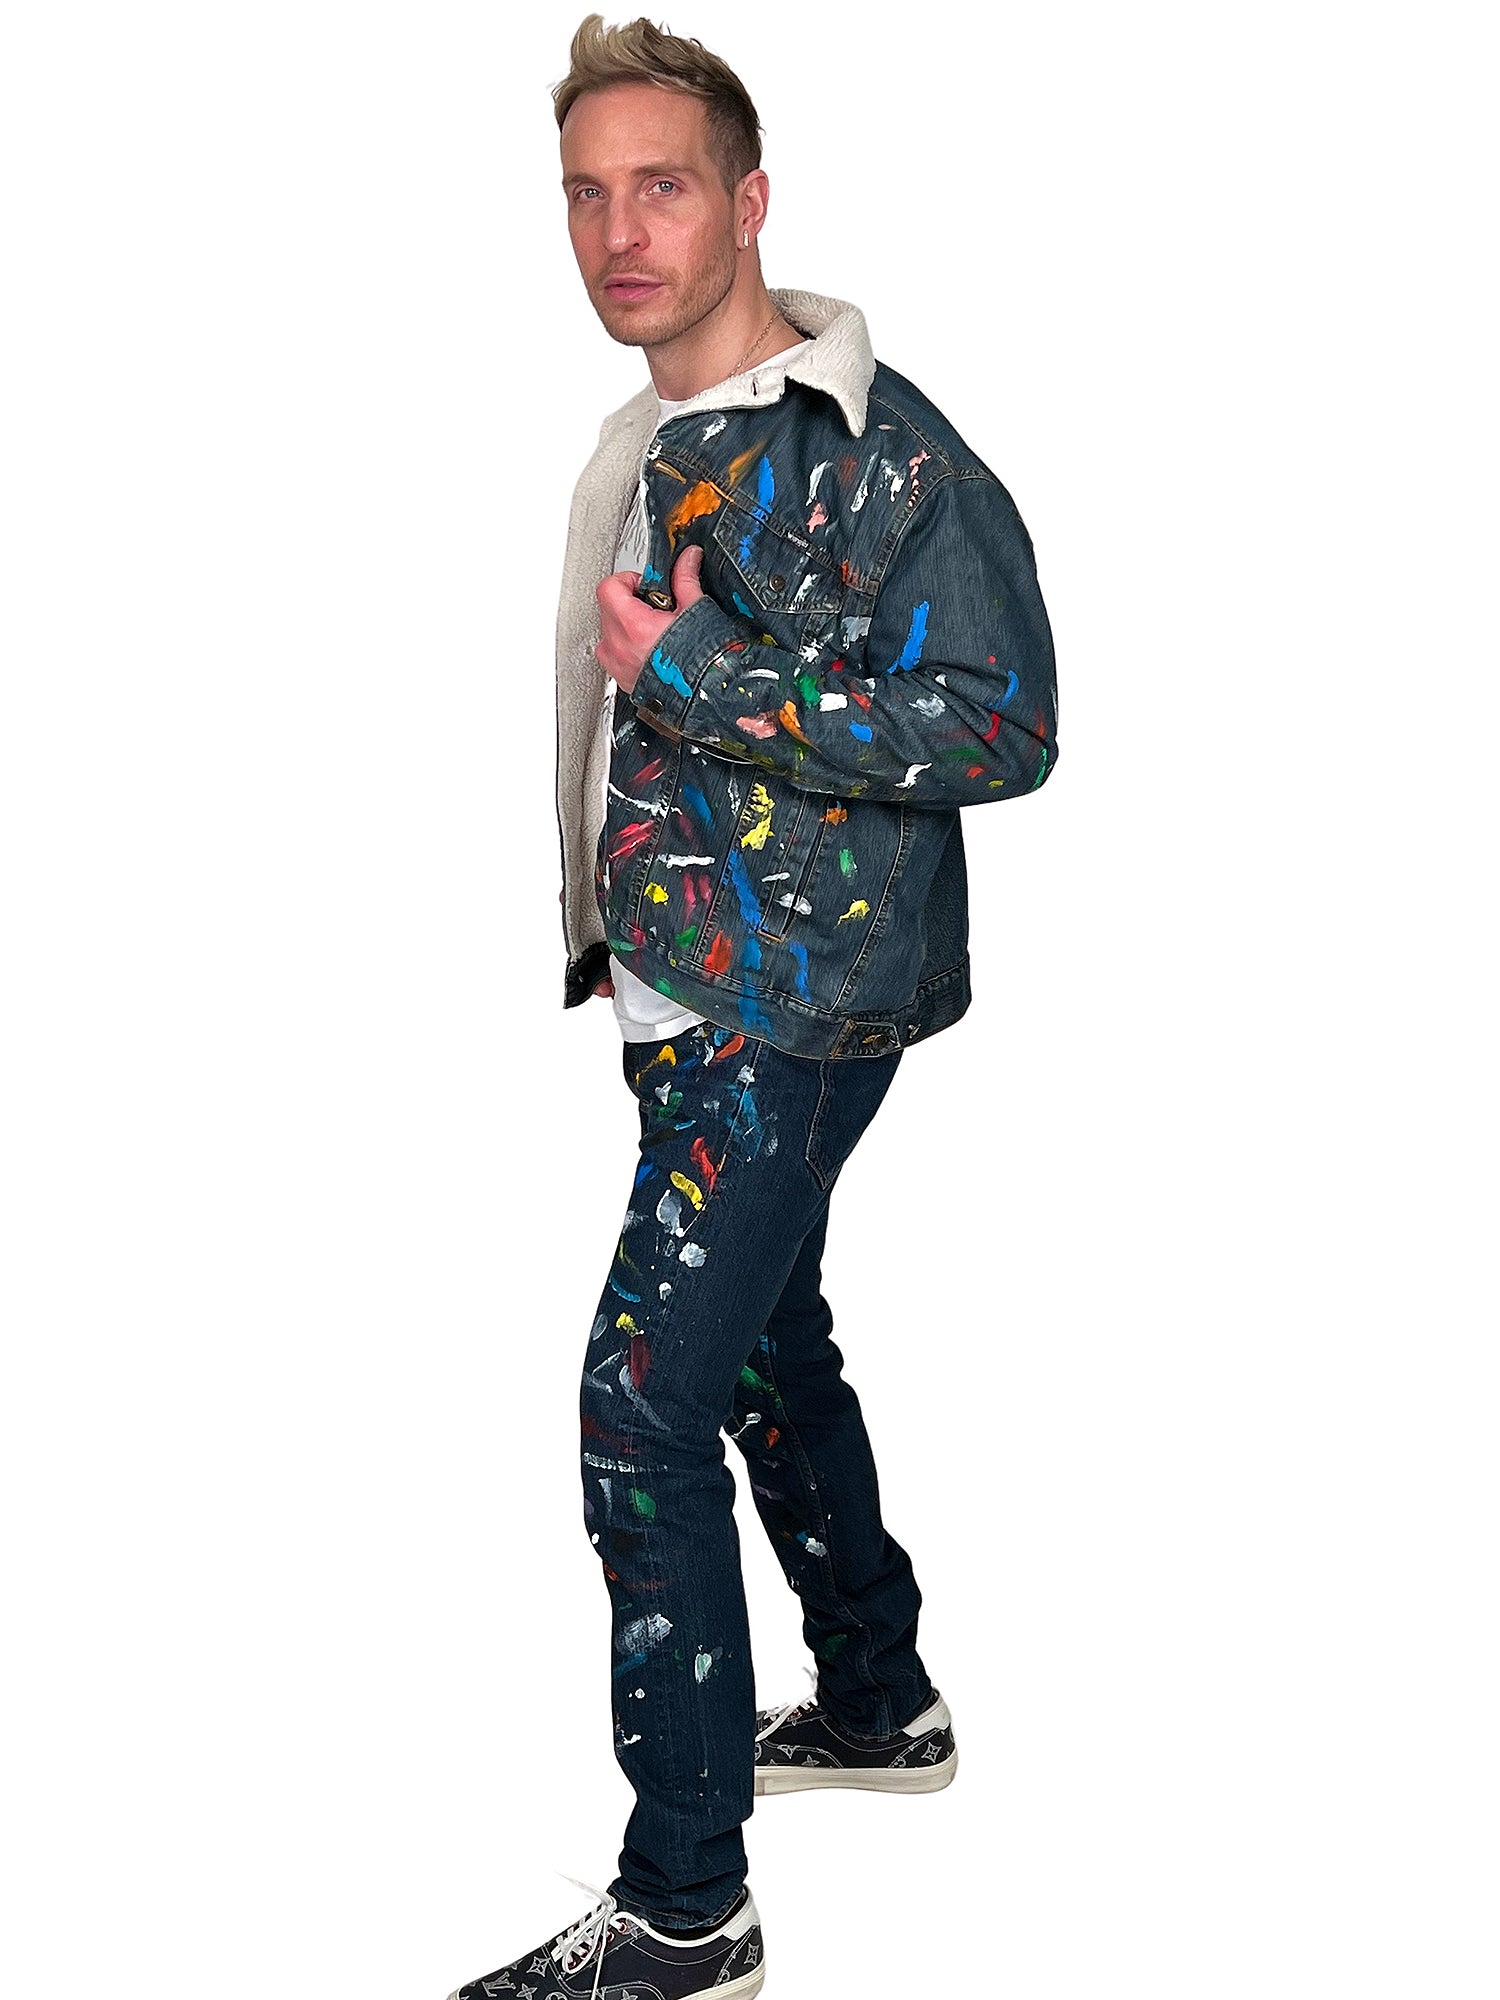 DAMIAN ELWES - &quot;Number 58&quot; - Hand Painted Denim Jacket by Damian Elwes